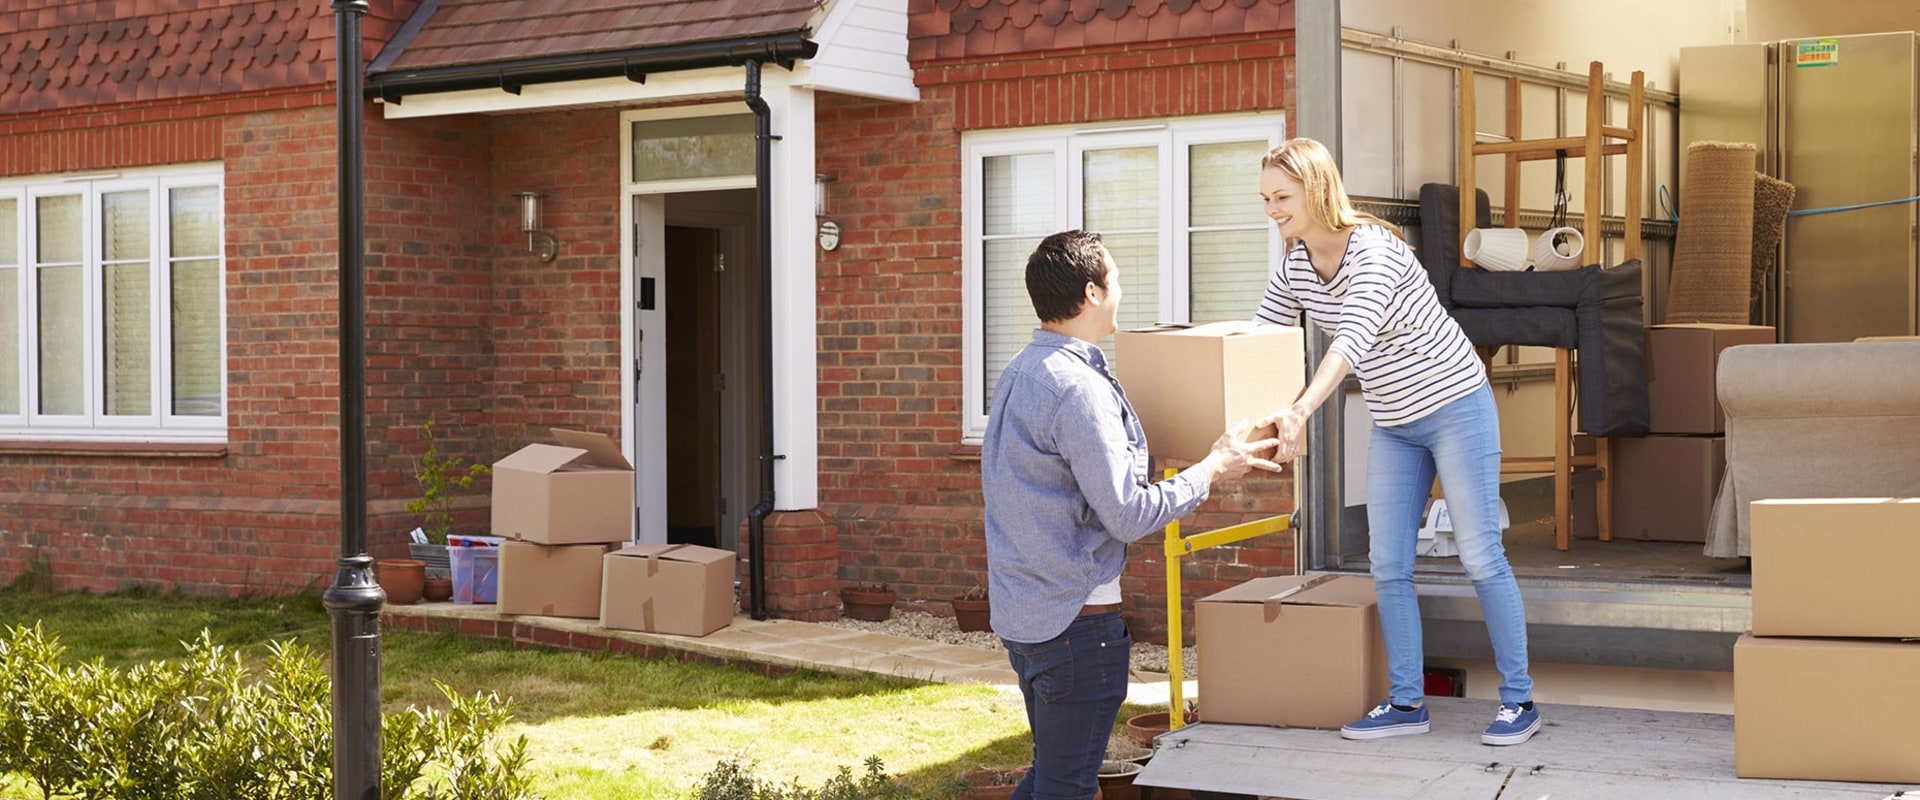 The Cost of Moving: What You Need to Know